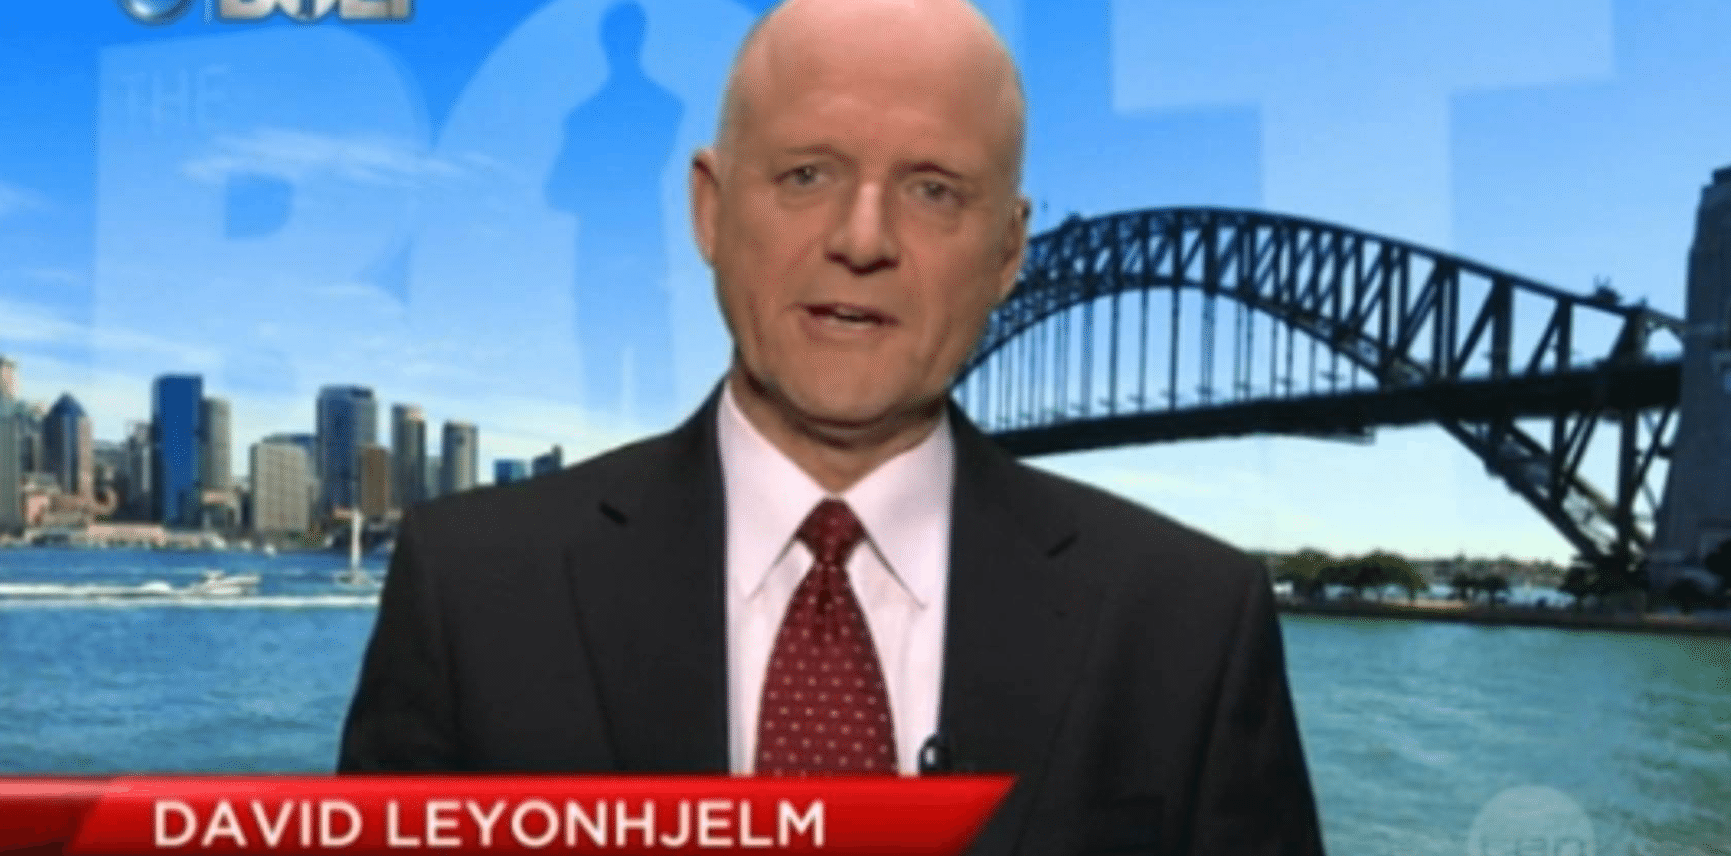 Liberal Democrats senator David Leyonhjelm fears gay activists will tie up the courts